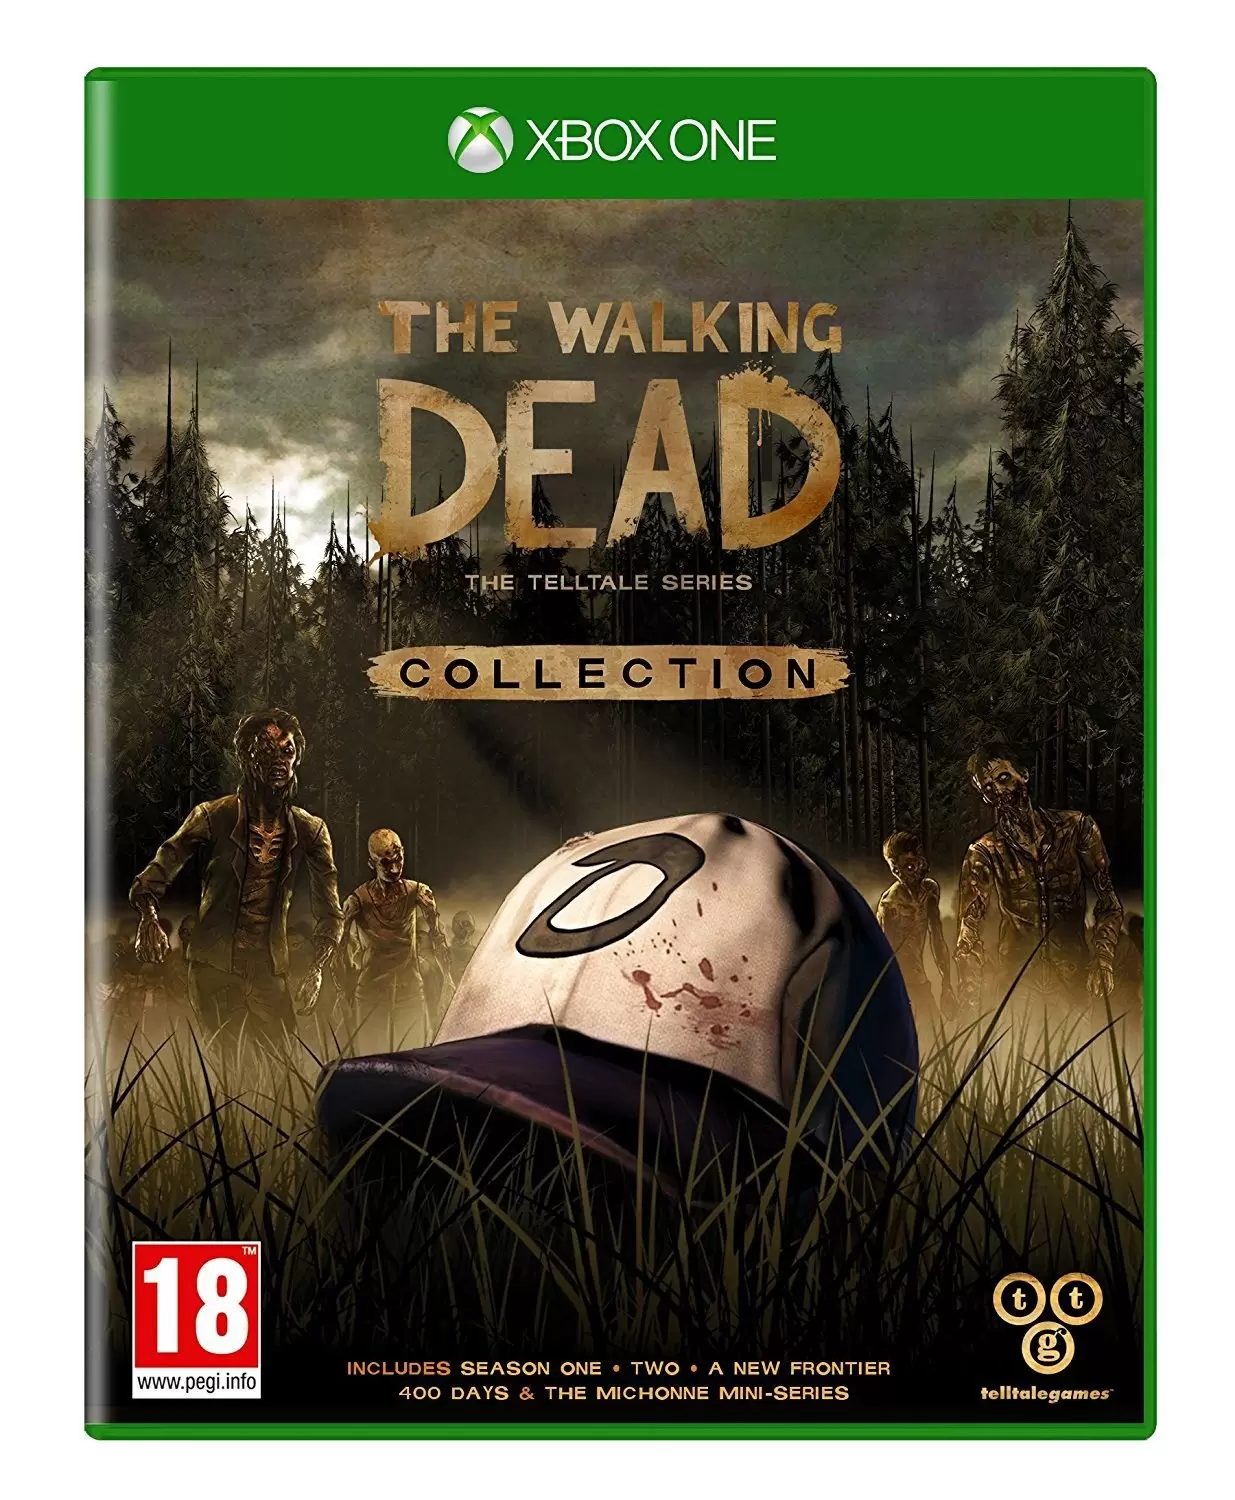 XBOX One Games - The Walking Dead : Collection